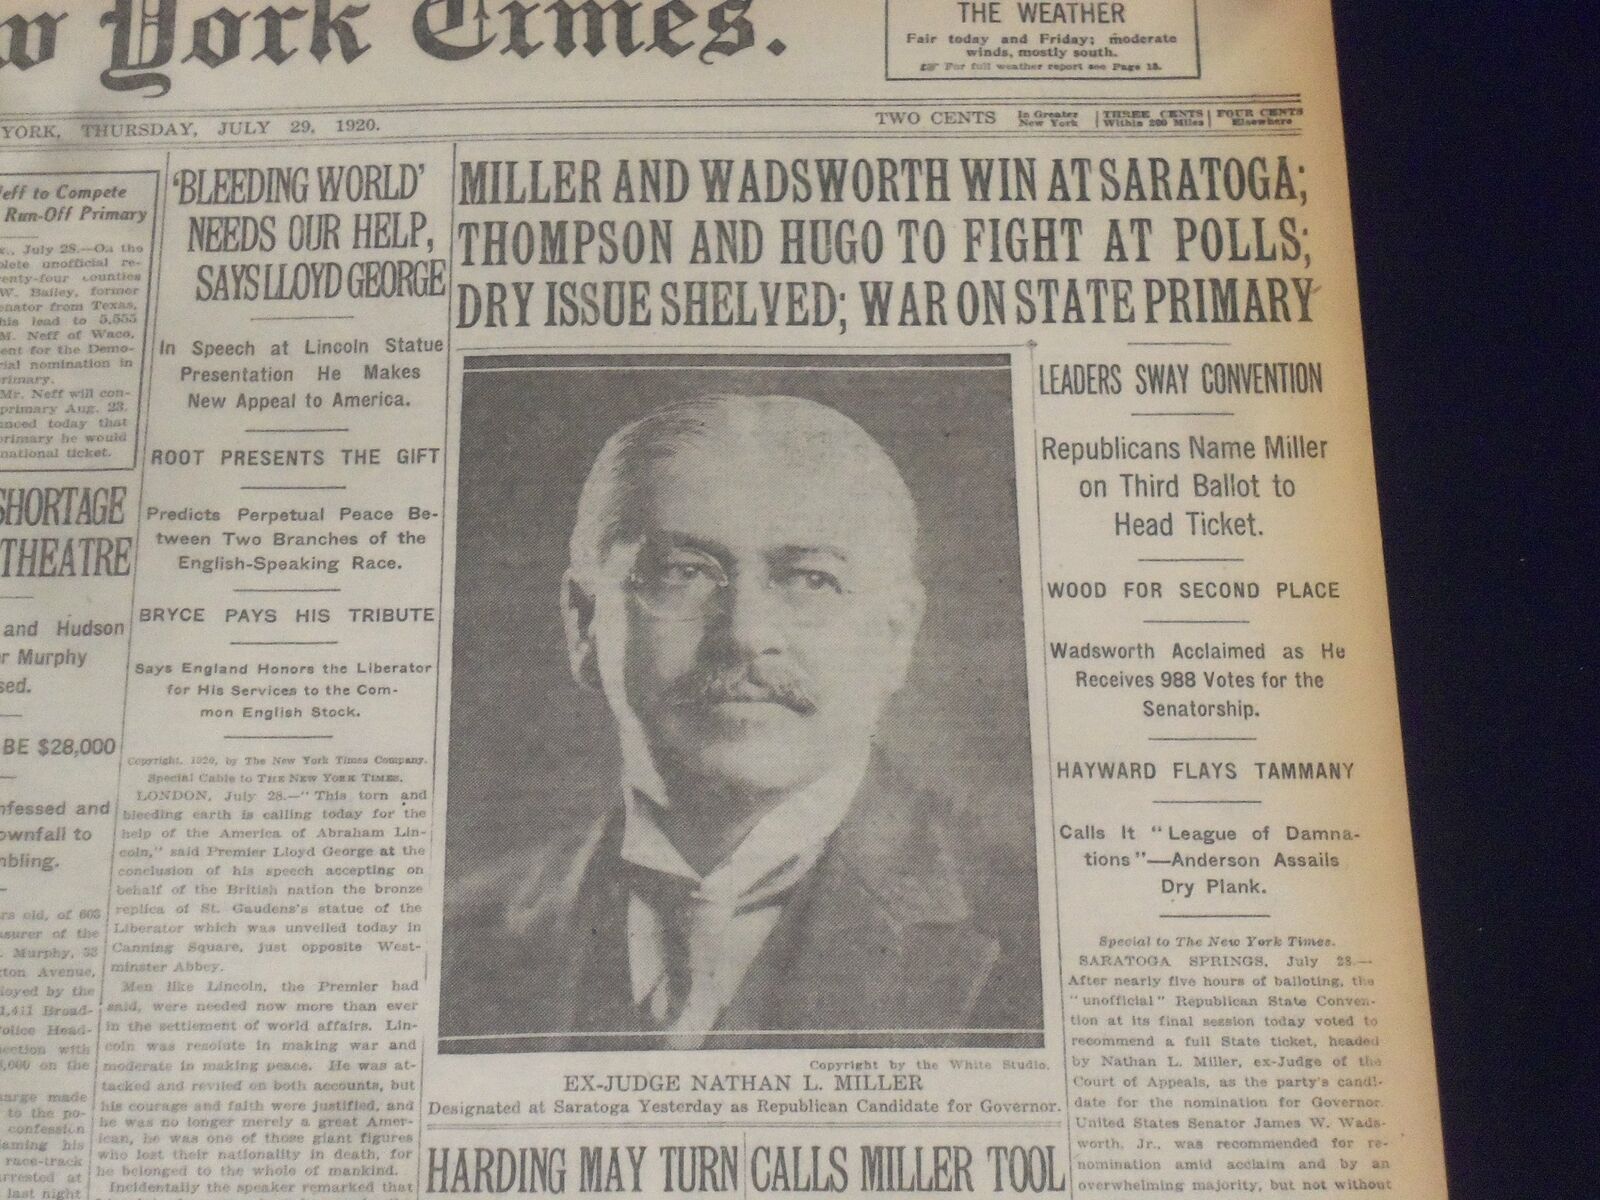 1920 JULY 29 NEW YORK TIMES - MILLER AND WADSWORTH WIN AT SARATOGA - NT 9334